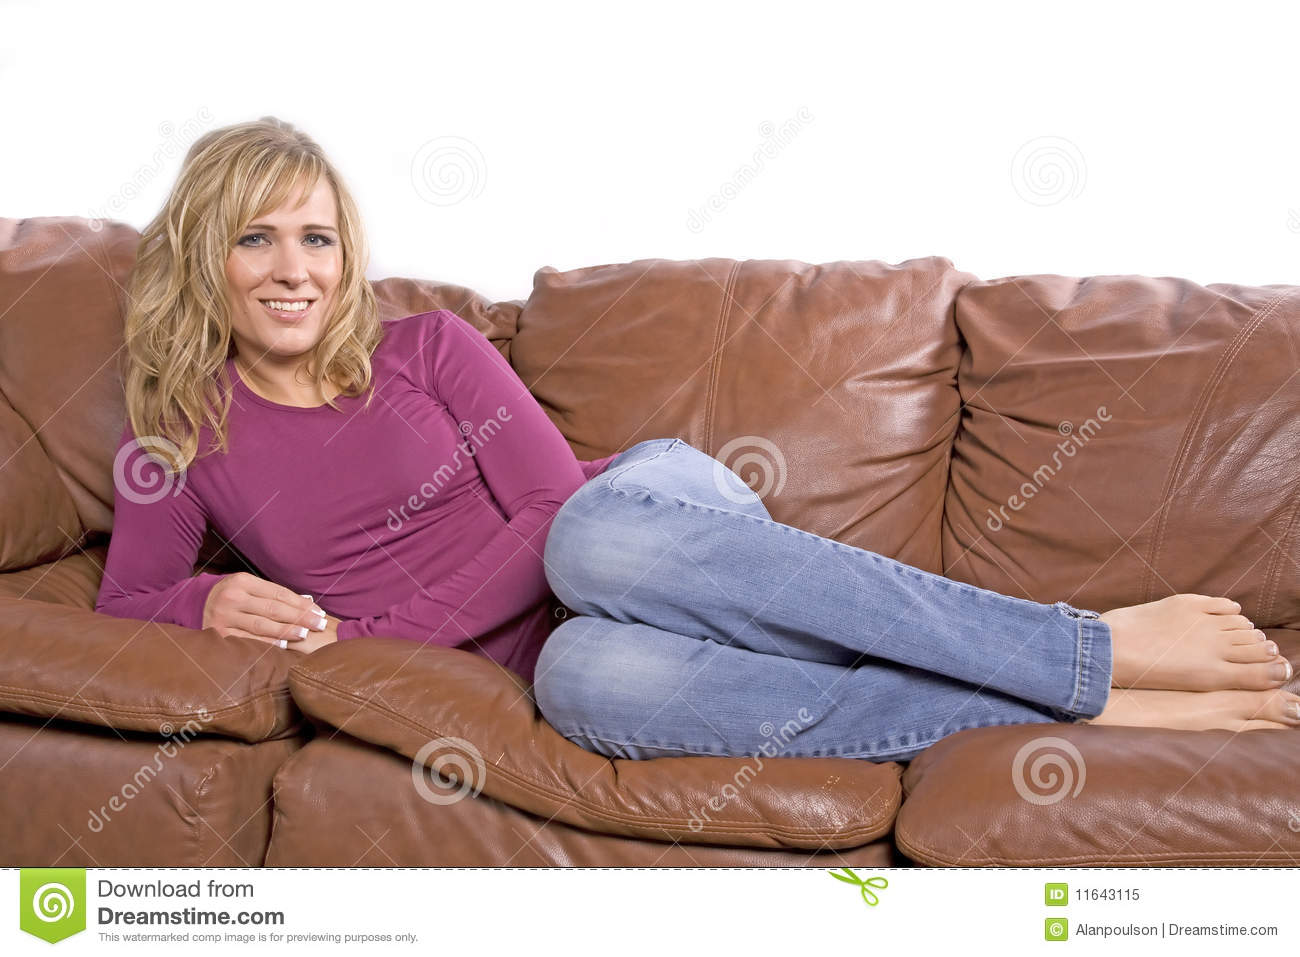 Woman Barefoot On Couch Royalty Free Stock Photo   Image  11643115